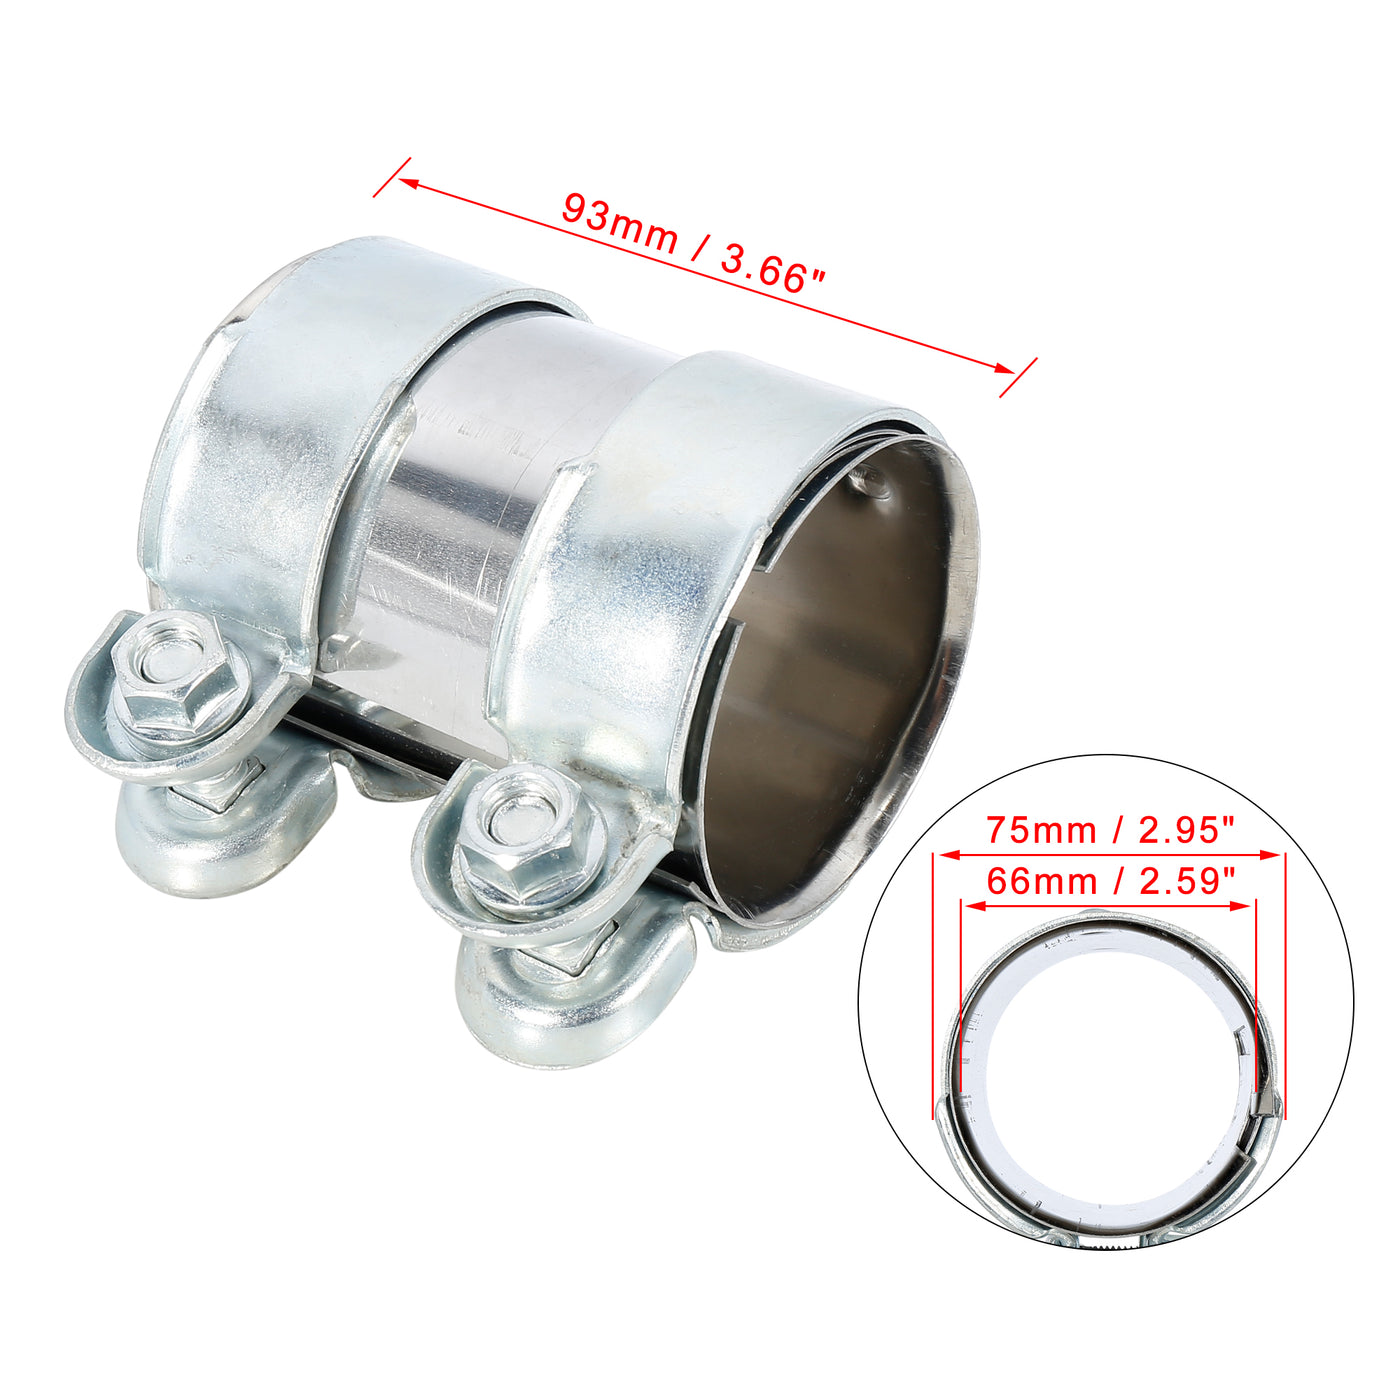 X AUTOHAUX Exhaust Pipe Sleeve Connector Clamp Coupler for Audi A3 A4 A5 66 x 93 mm